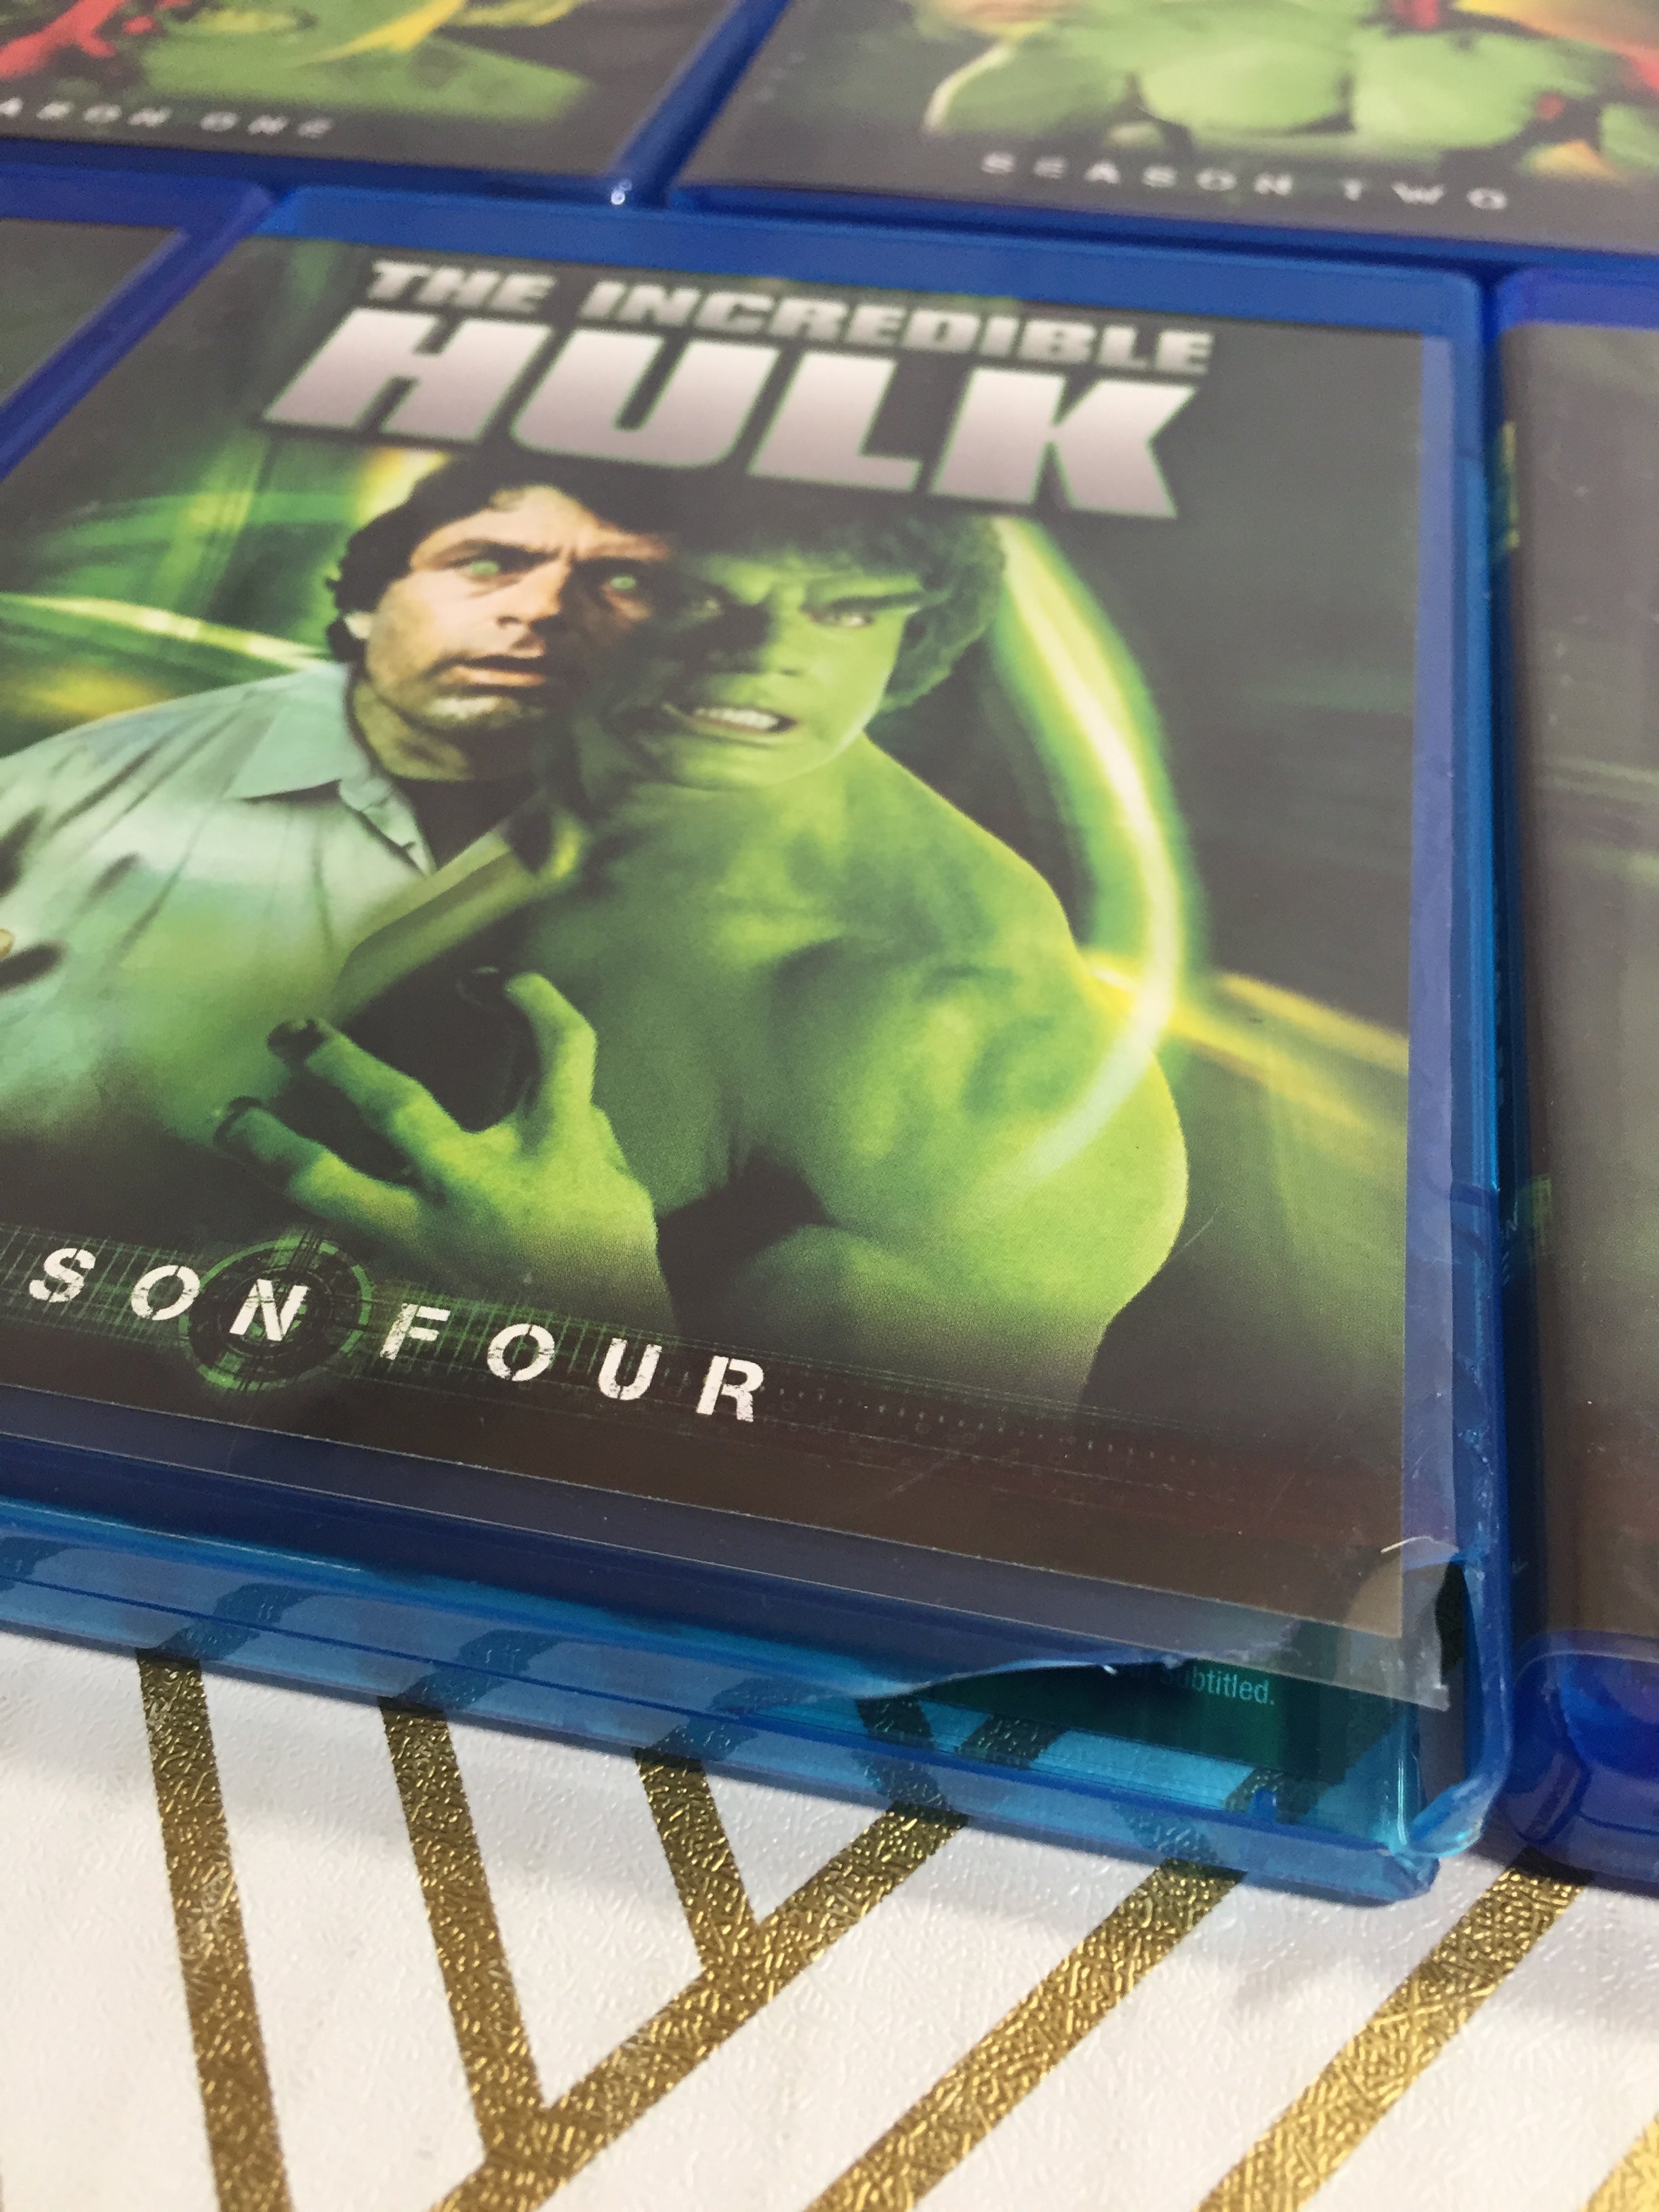 The Incredible Hulk: The Complete Series [Blu-ray] MISSING DISC 3(S3) (8038524387566)